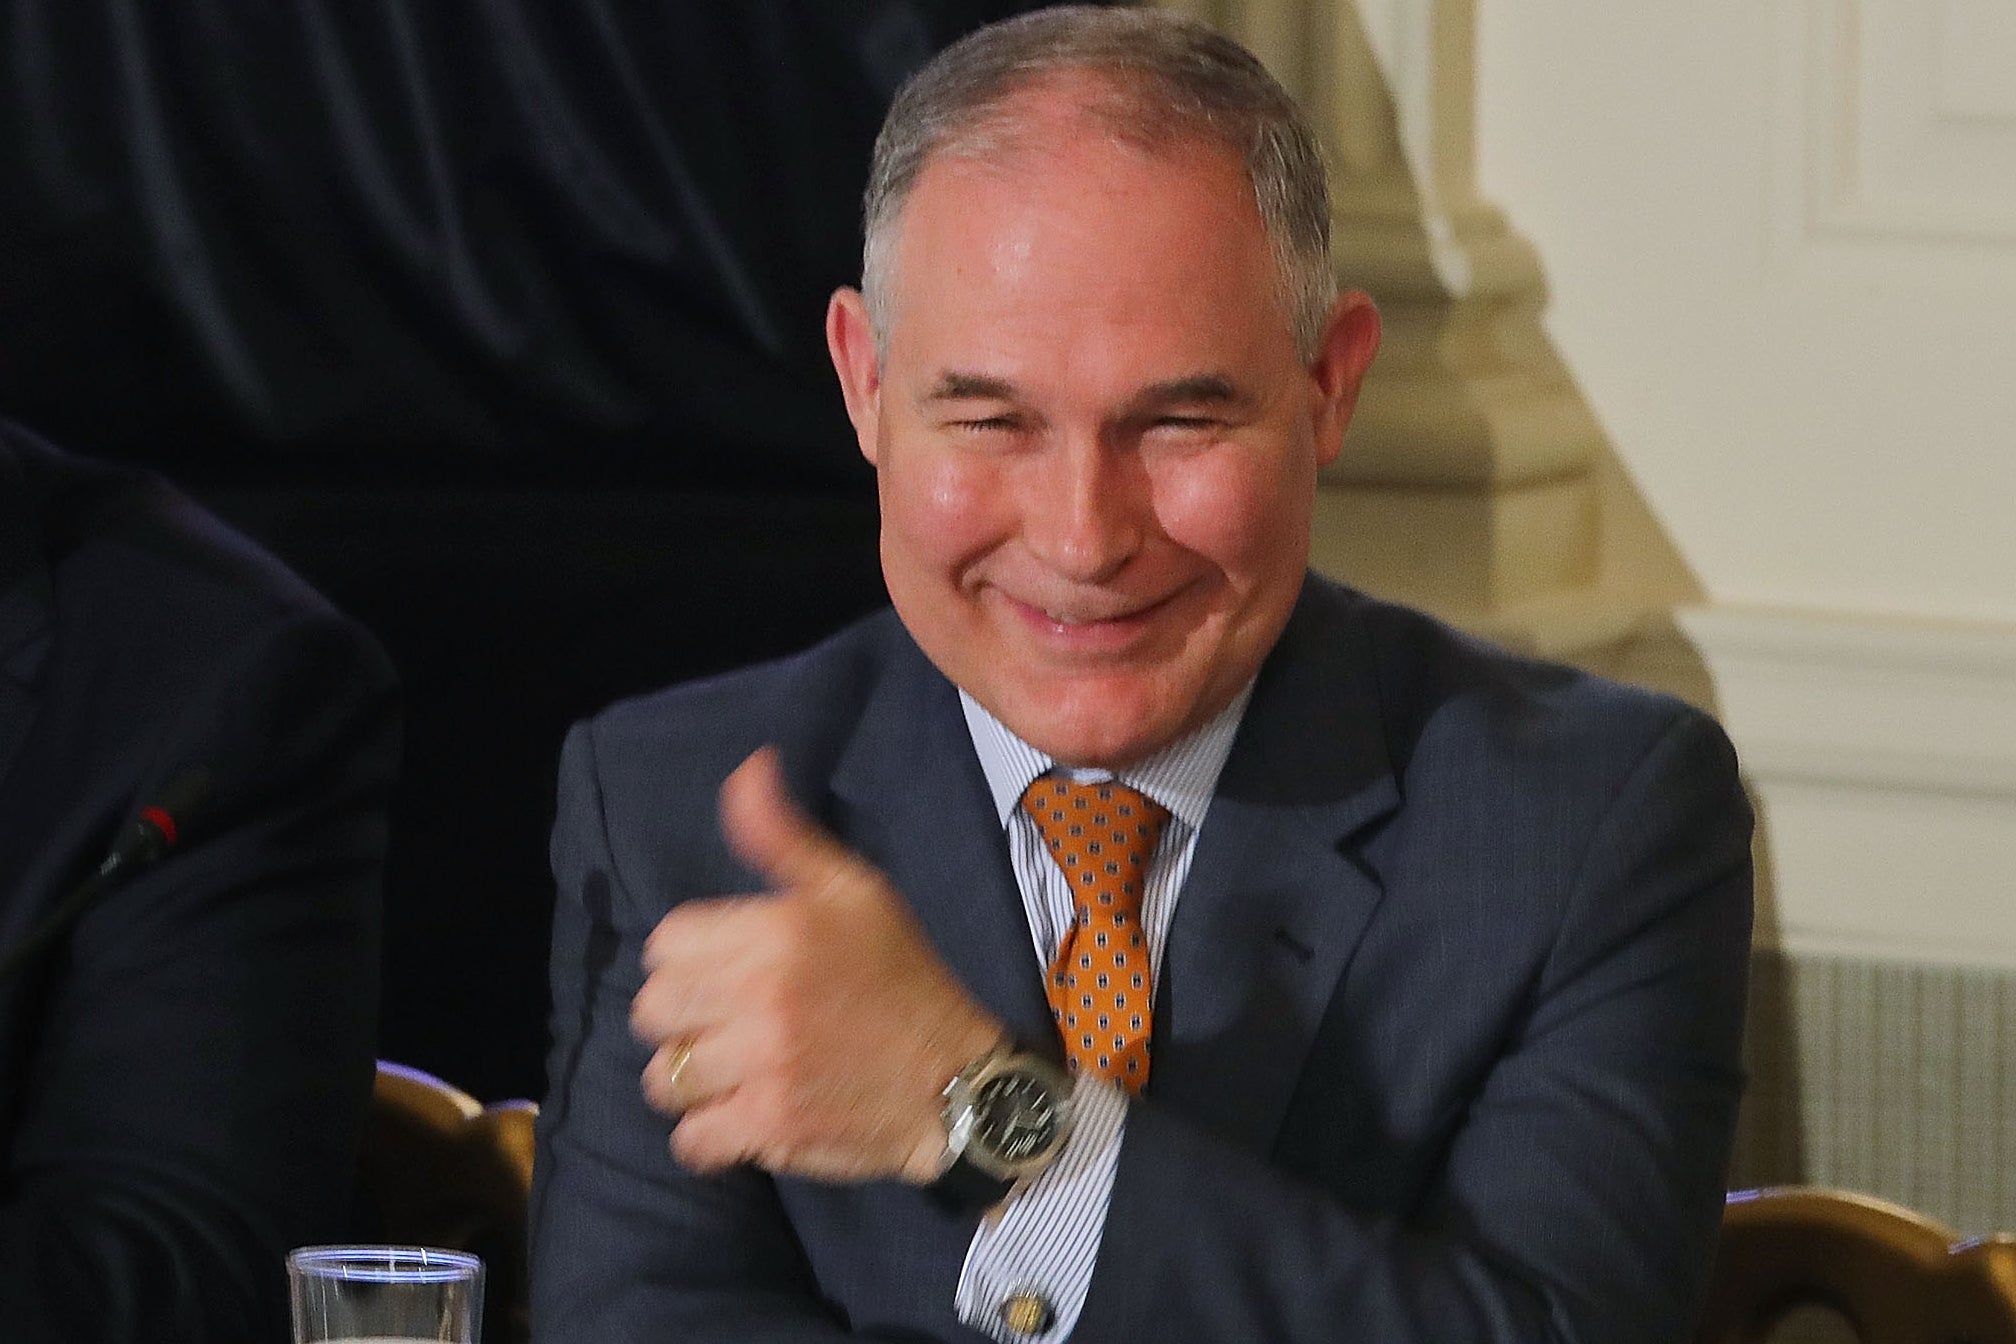 Scott Pruitt gives a thumbs-up sign at the White House on Feb. 12.